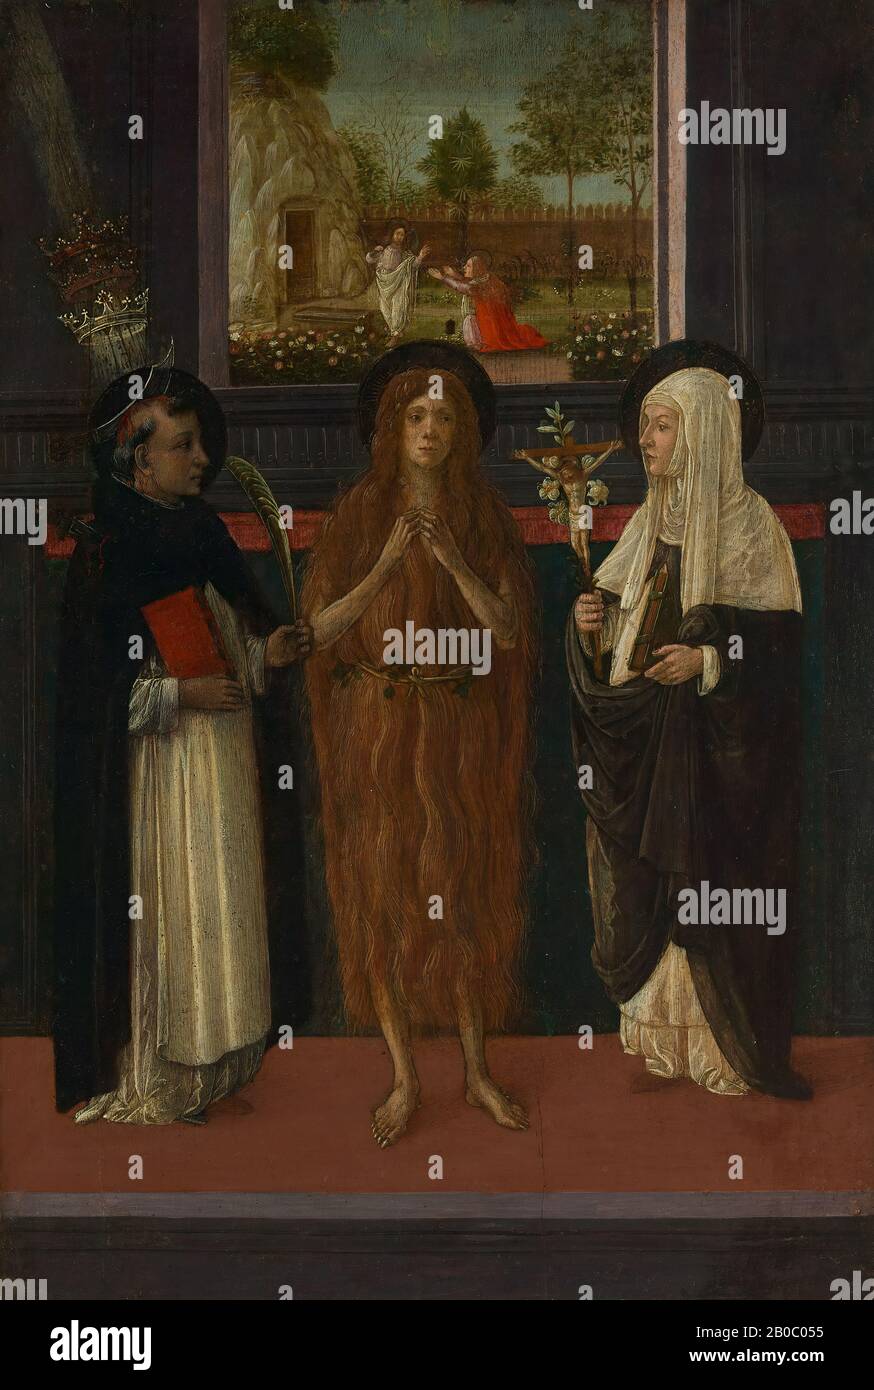 Gherardo del Fora, St. Mary Magdalen between St. Peter Martyr and St. Catharine of Siena, ca. 1475, tempera on panel, 16 3/4 in. x 11 1/4 in. (42.5 cm. x 28.5 cm.), Active in Florence in the second half of the fifteenth century, Gherardo was a painter and book illuminator who benefited from the patronage of Lorenzo de' Medici, known as Lorenzo the Magnificent. Gherardo's works reveal a powerful interest in classical antiquity. In this small devotional panel, perhaps commissioned for a Dominican convent, Mary Magdalene is flanked by Peter Martyr (identified by the transparent knife embedded in Stock Photo